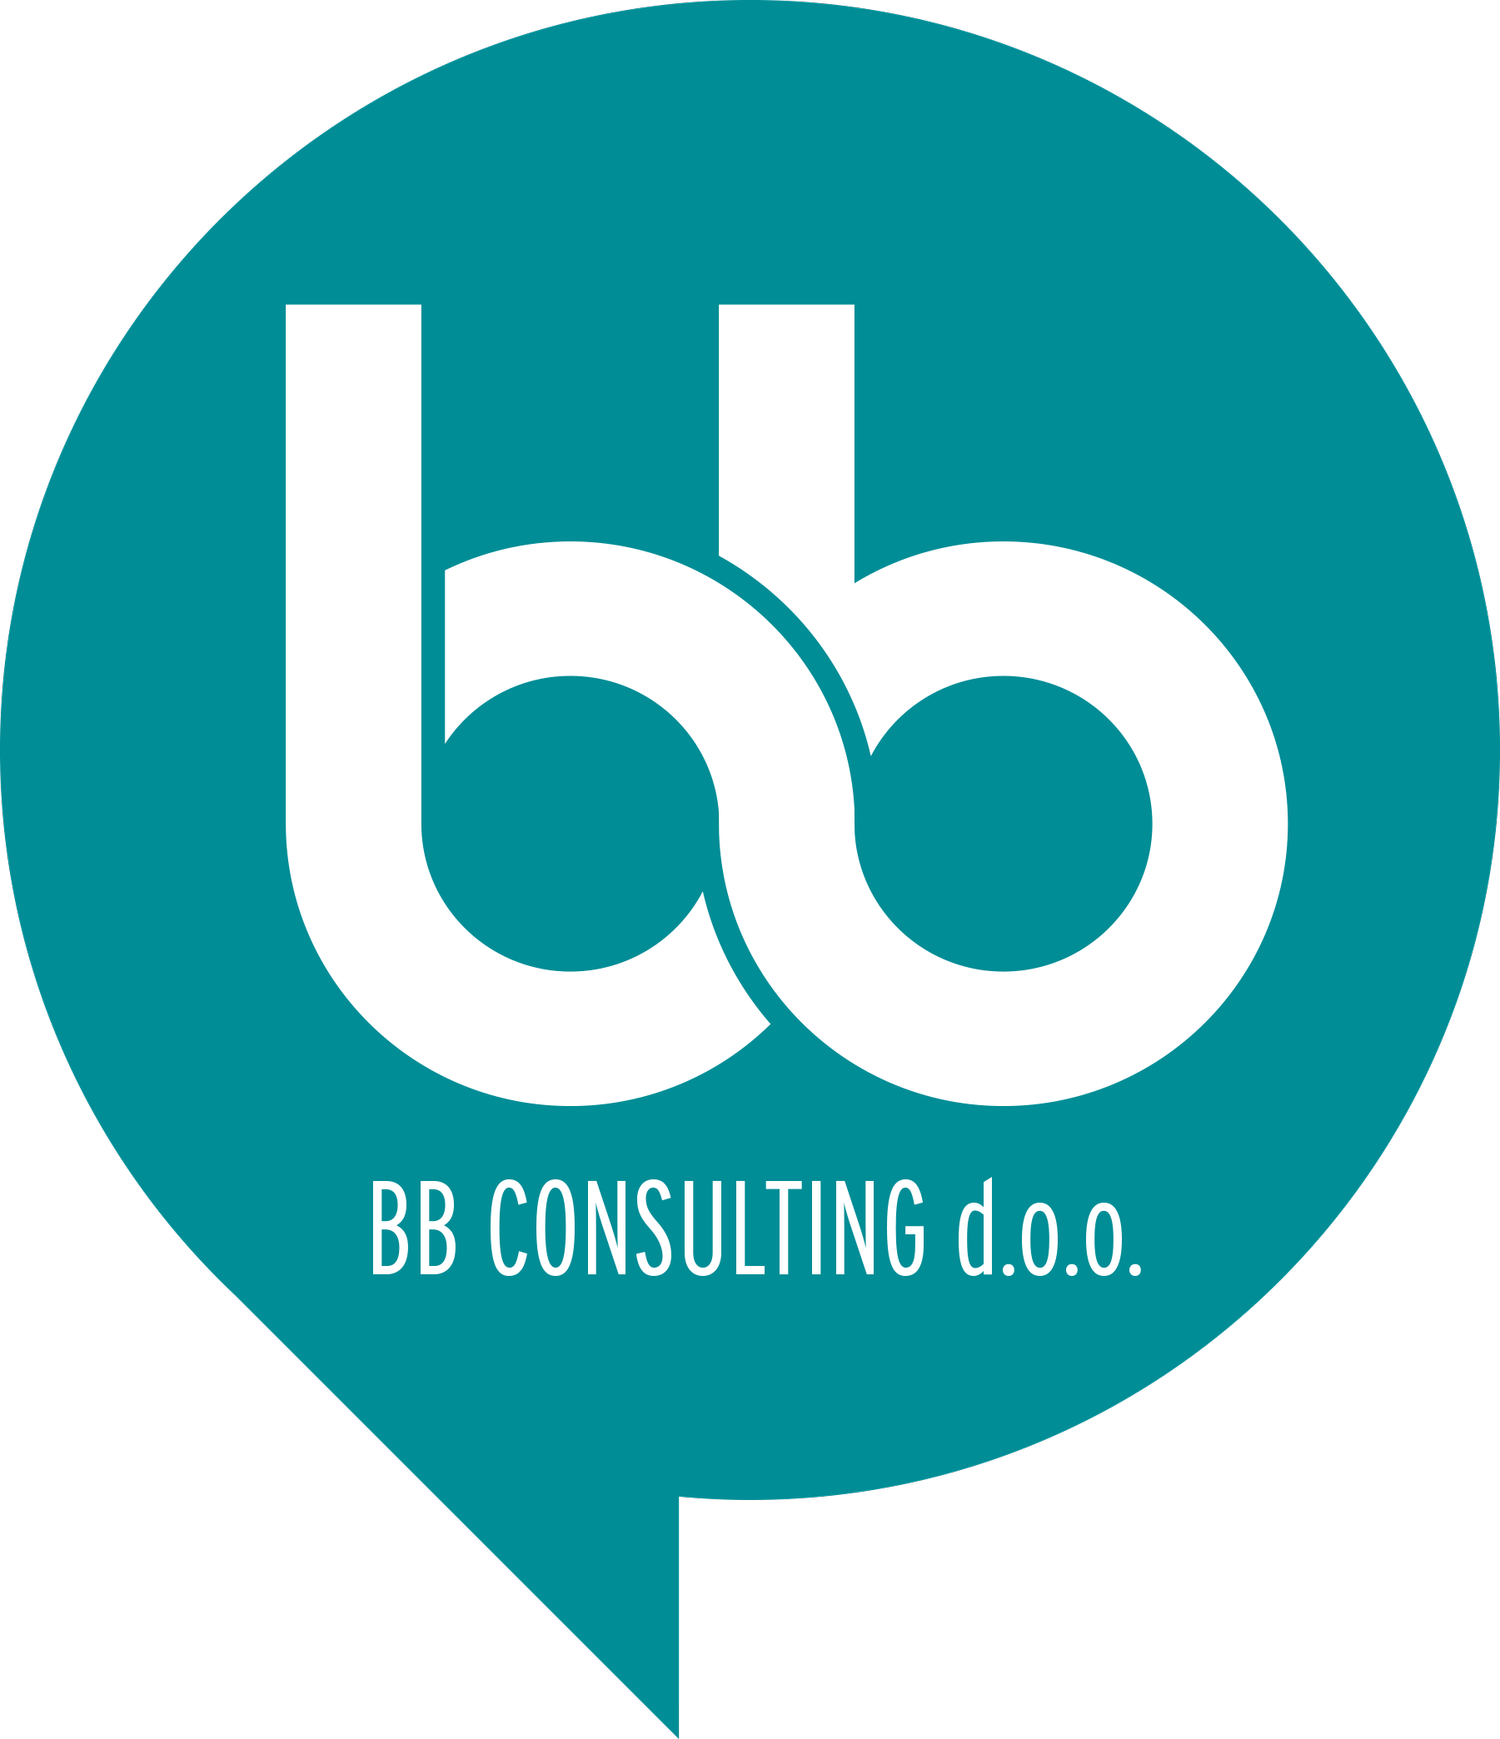 BB Consulting